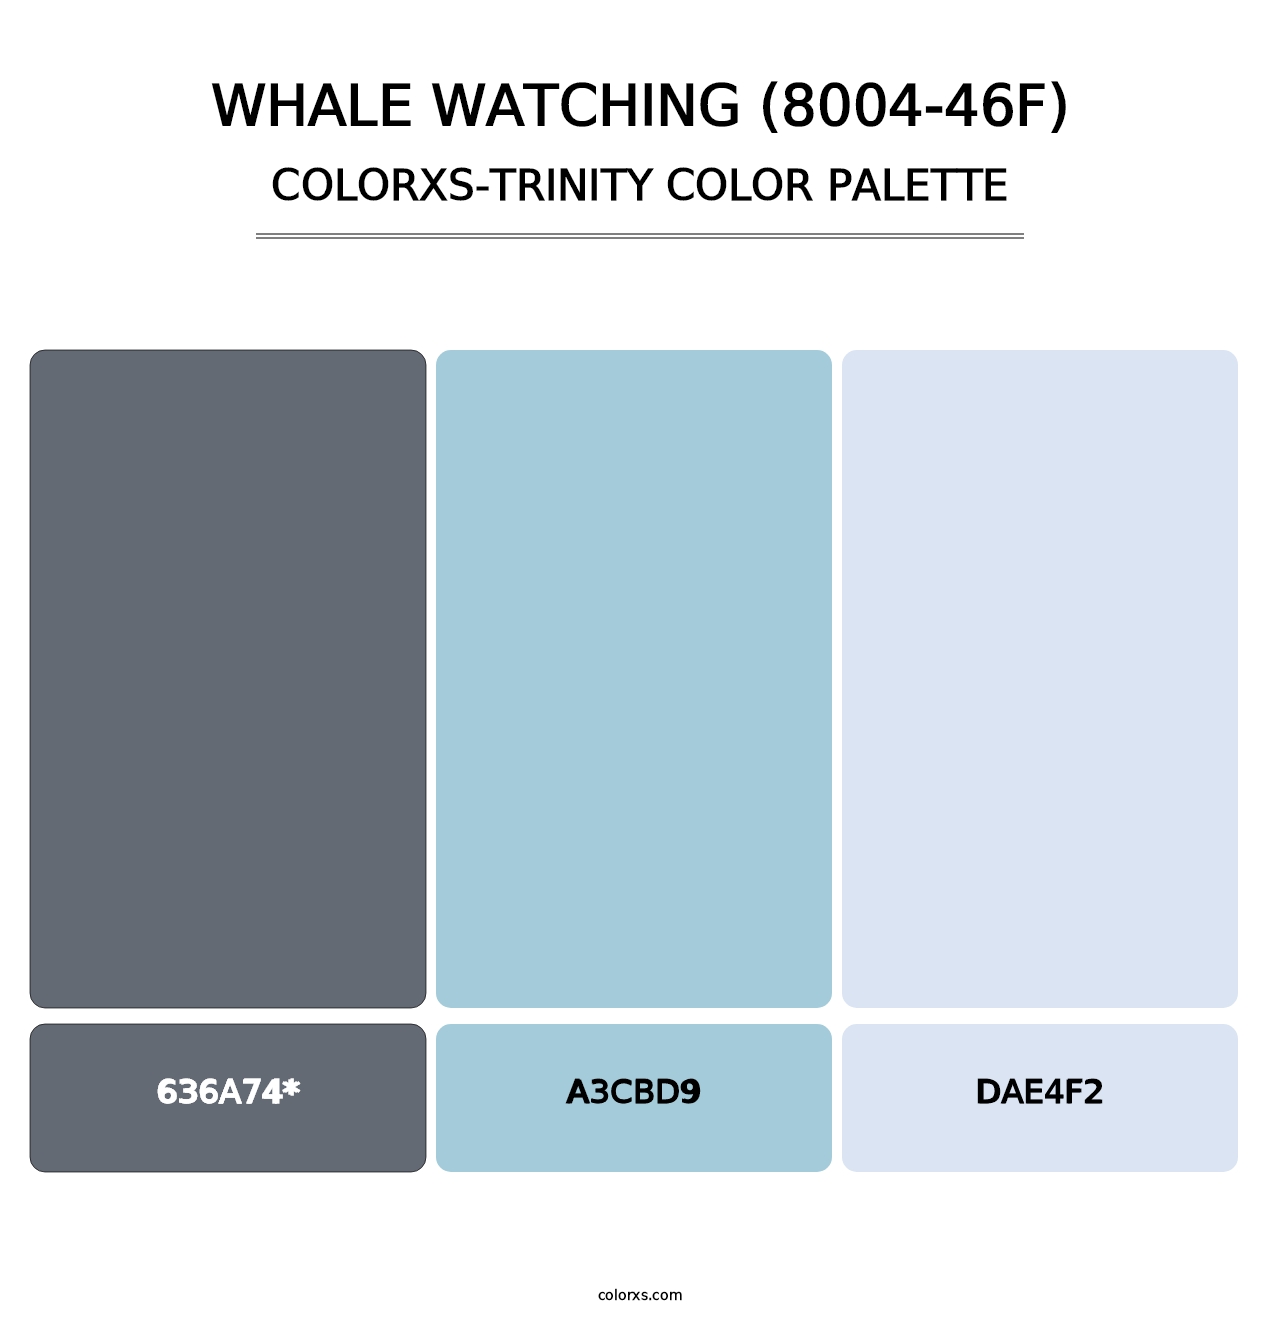 Whale Watching (8004-46F) - Colorxs Trinity Palette